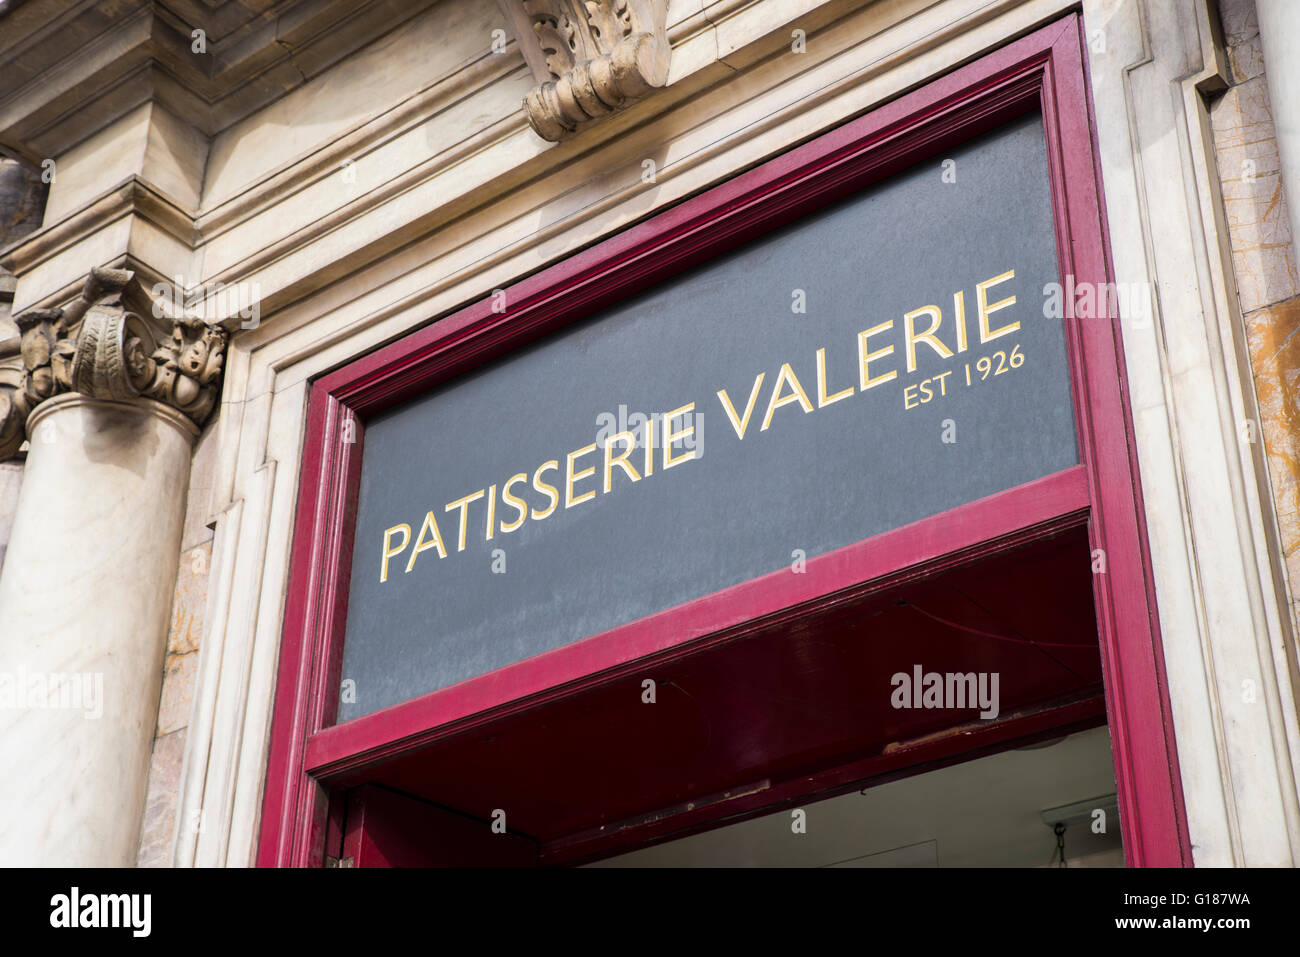 LONDON, UK - MAY 7TH 2016: The sign above the entrance to Patisserie Valerie cafe restaurant on Piccadilly in central London, on Stock Photo